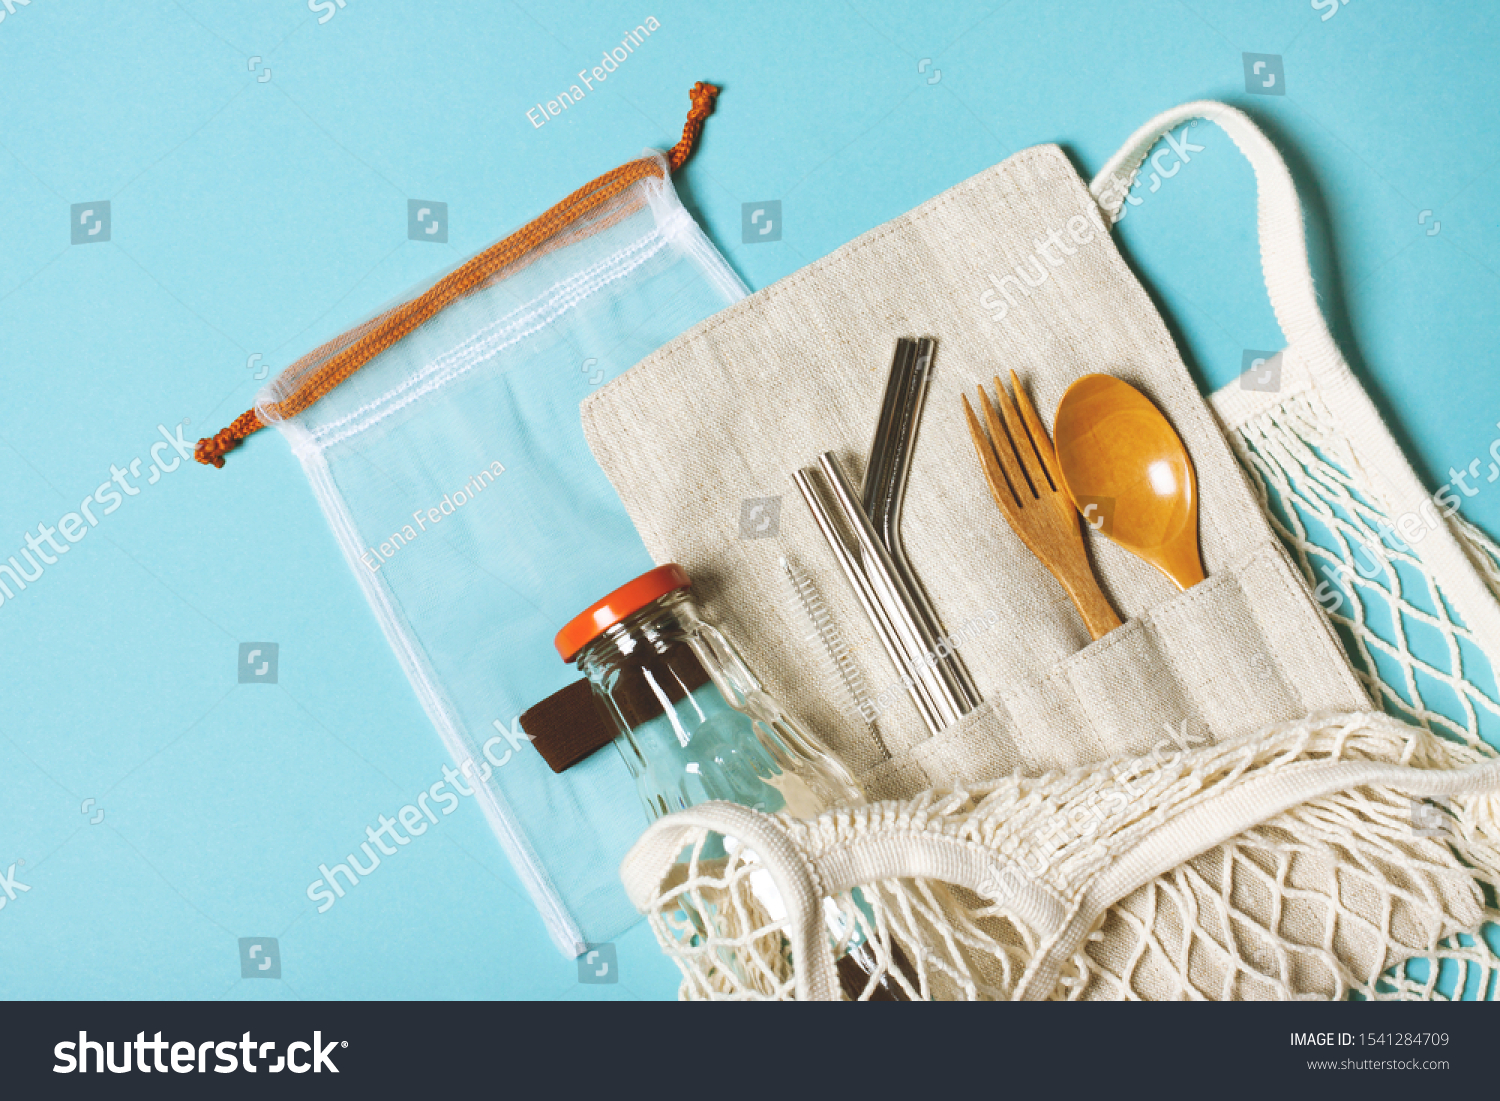 Set of reusable items for an eco-friendly lifestyle. Eco bag, glass bottle for water, metal tubes, wooden fork and spoon. Zero waste concept, plastic-free, organic, eco-friendly shopping #1541284709